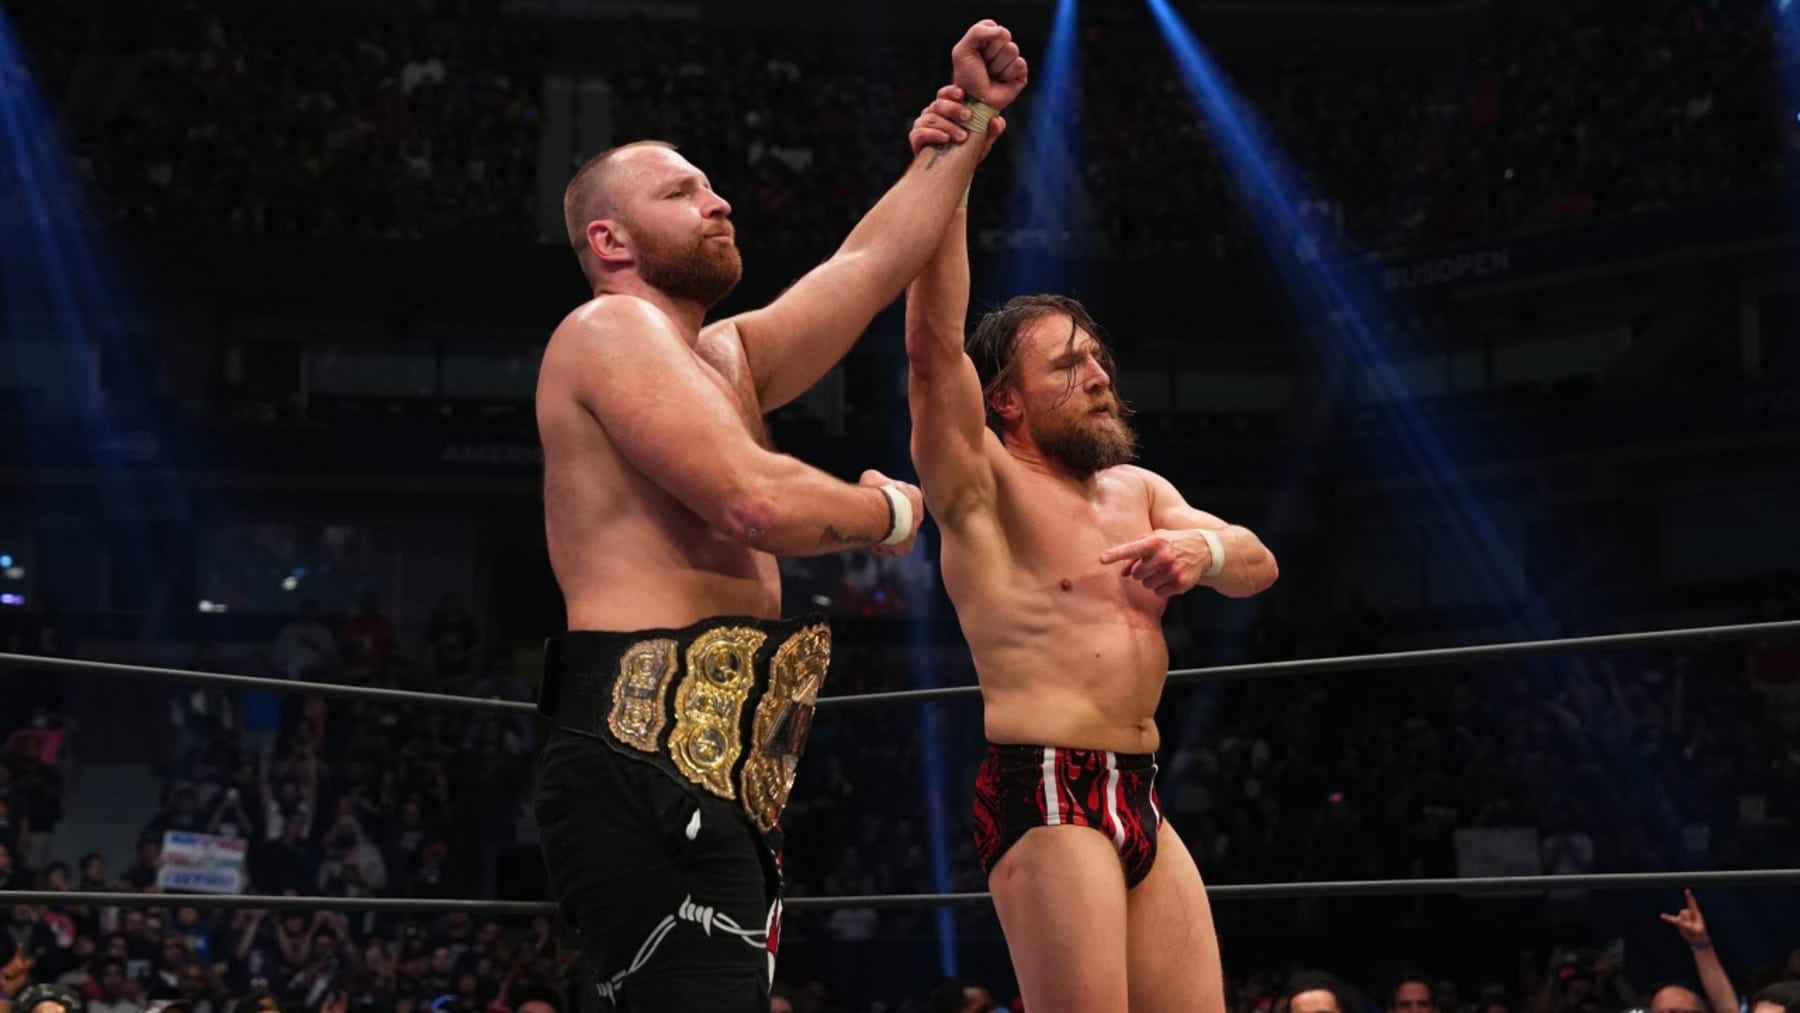 The Best Latino Wrestlers Currently In The WWE and AEW Today